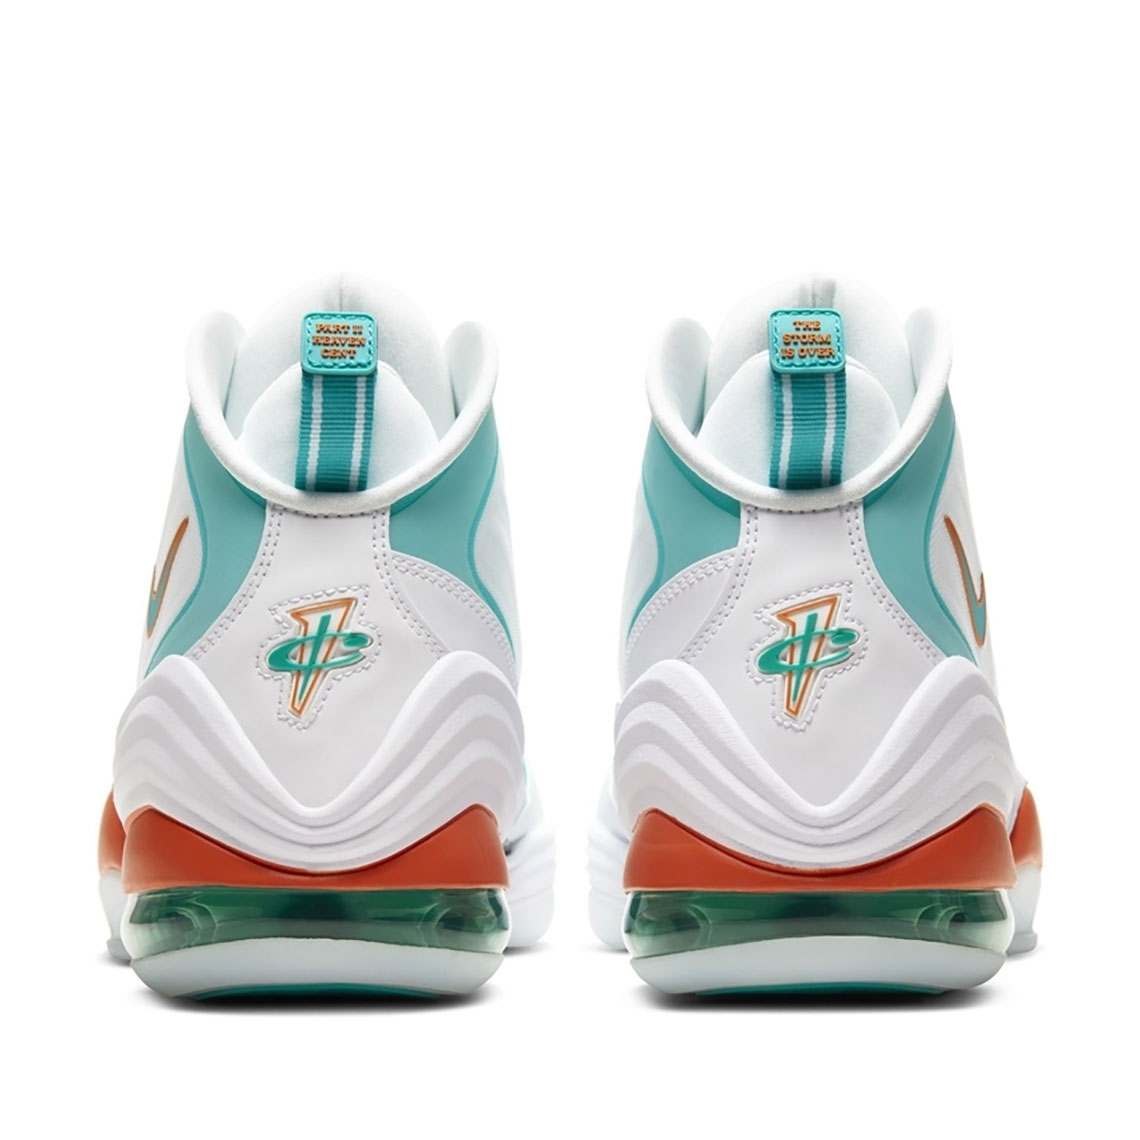 Nike Air Penny 5 White Teal Orange Dolphins 2020 4